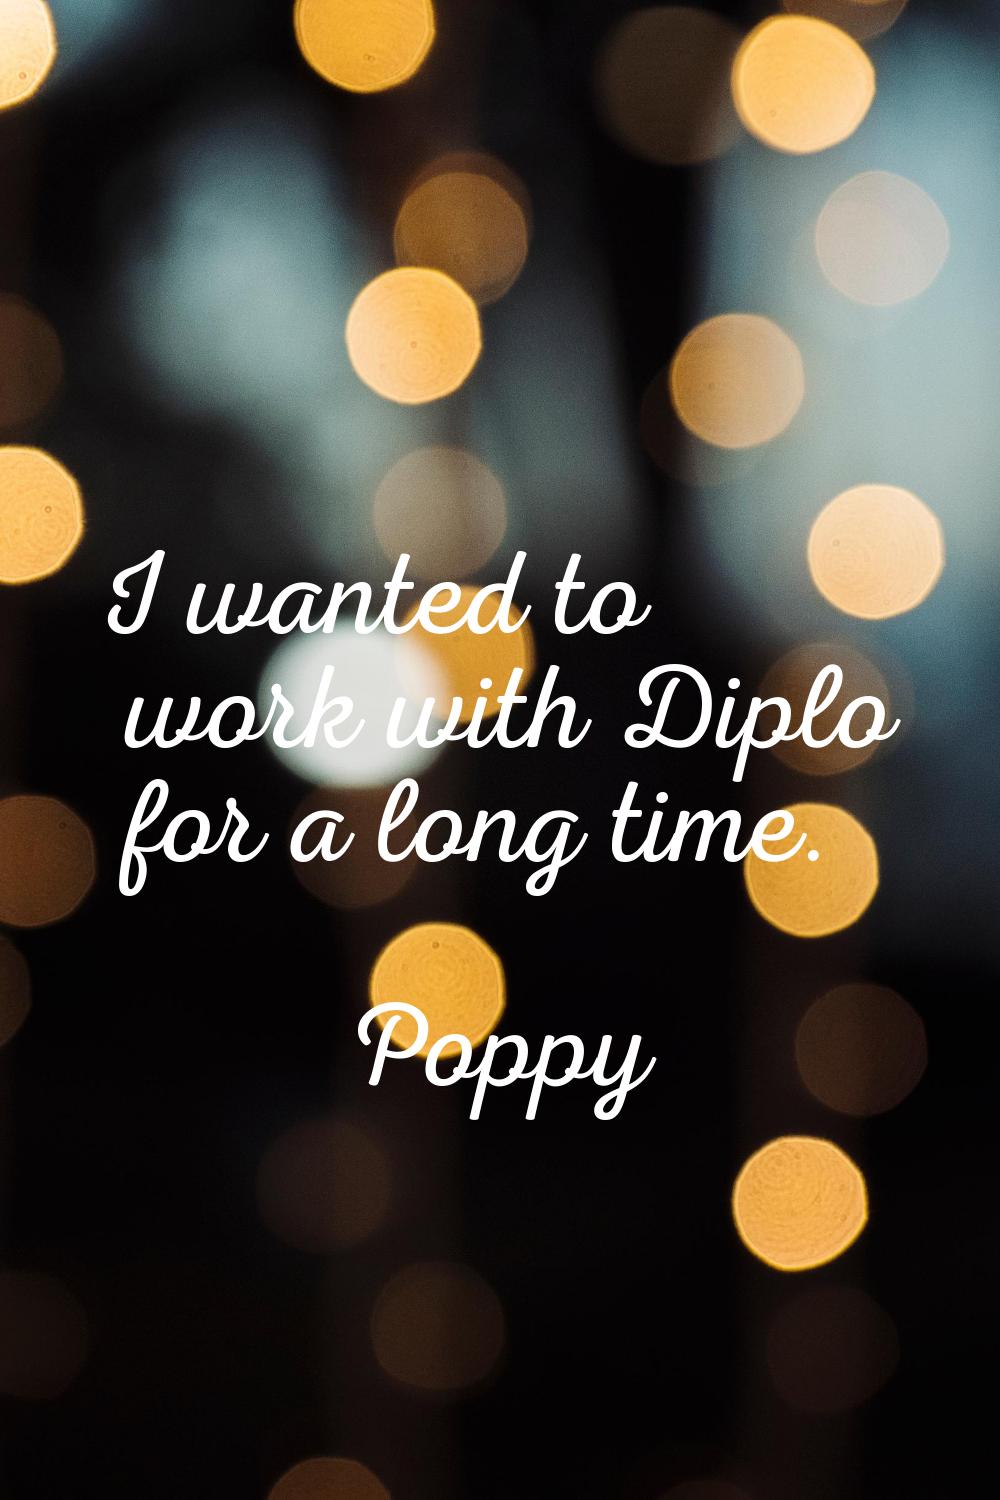 I wanted to work with Diplo for a long time.